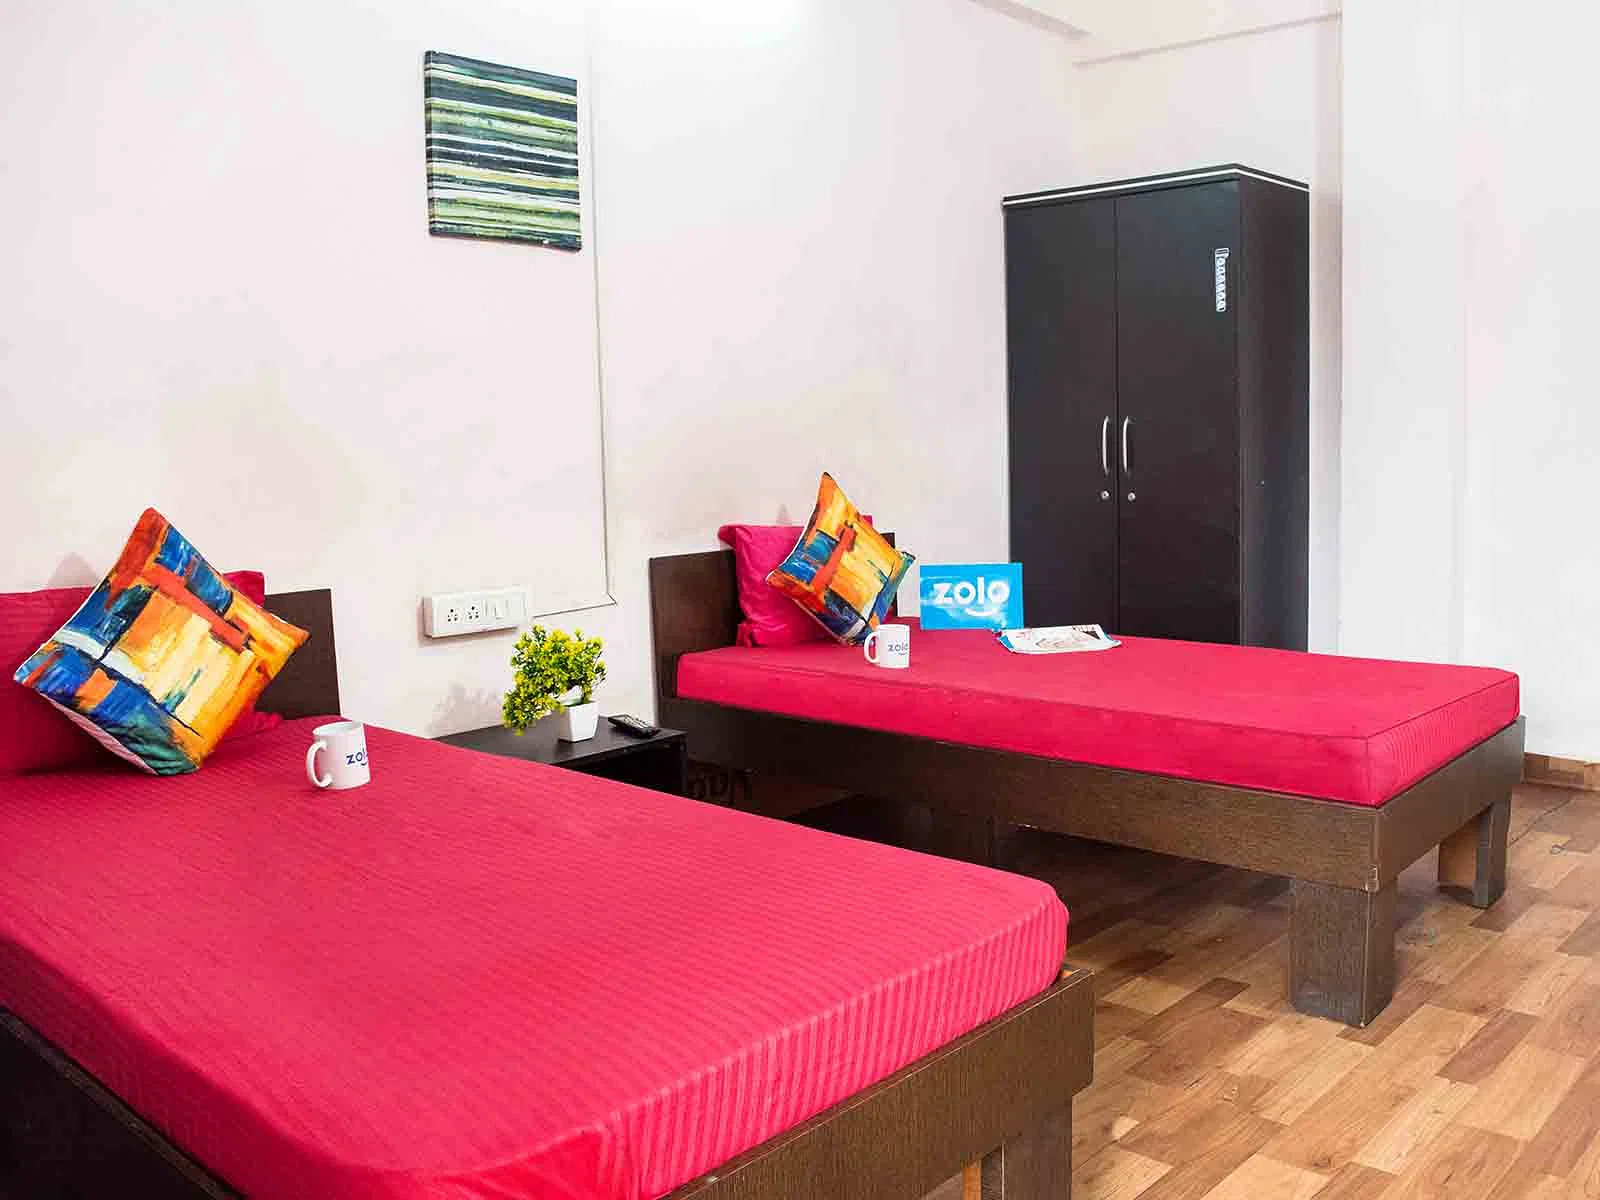 safe and affordable hostels for men students with 24/7 security and CCTV surveillance-Zolo House of Black Beard